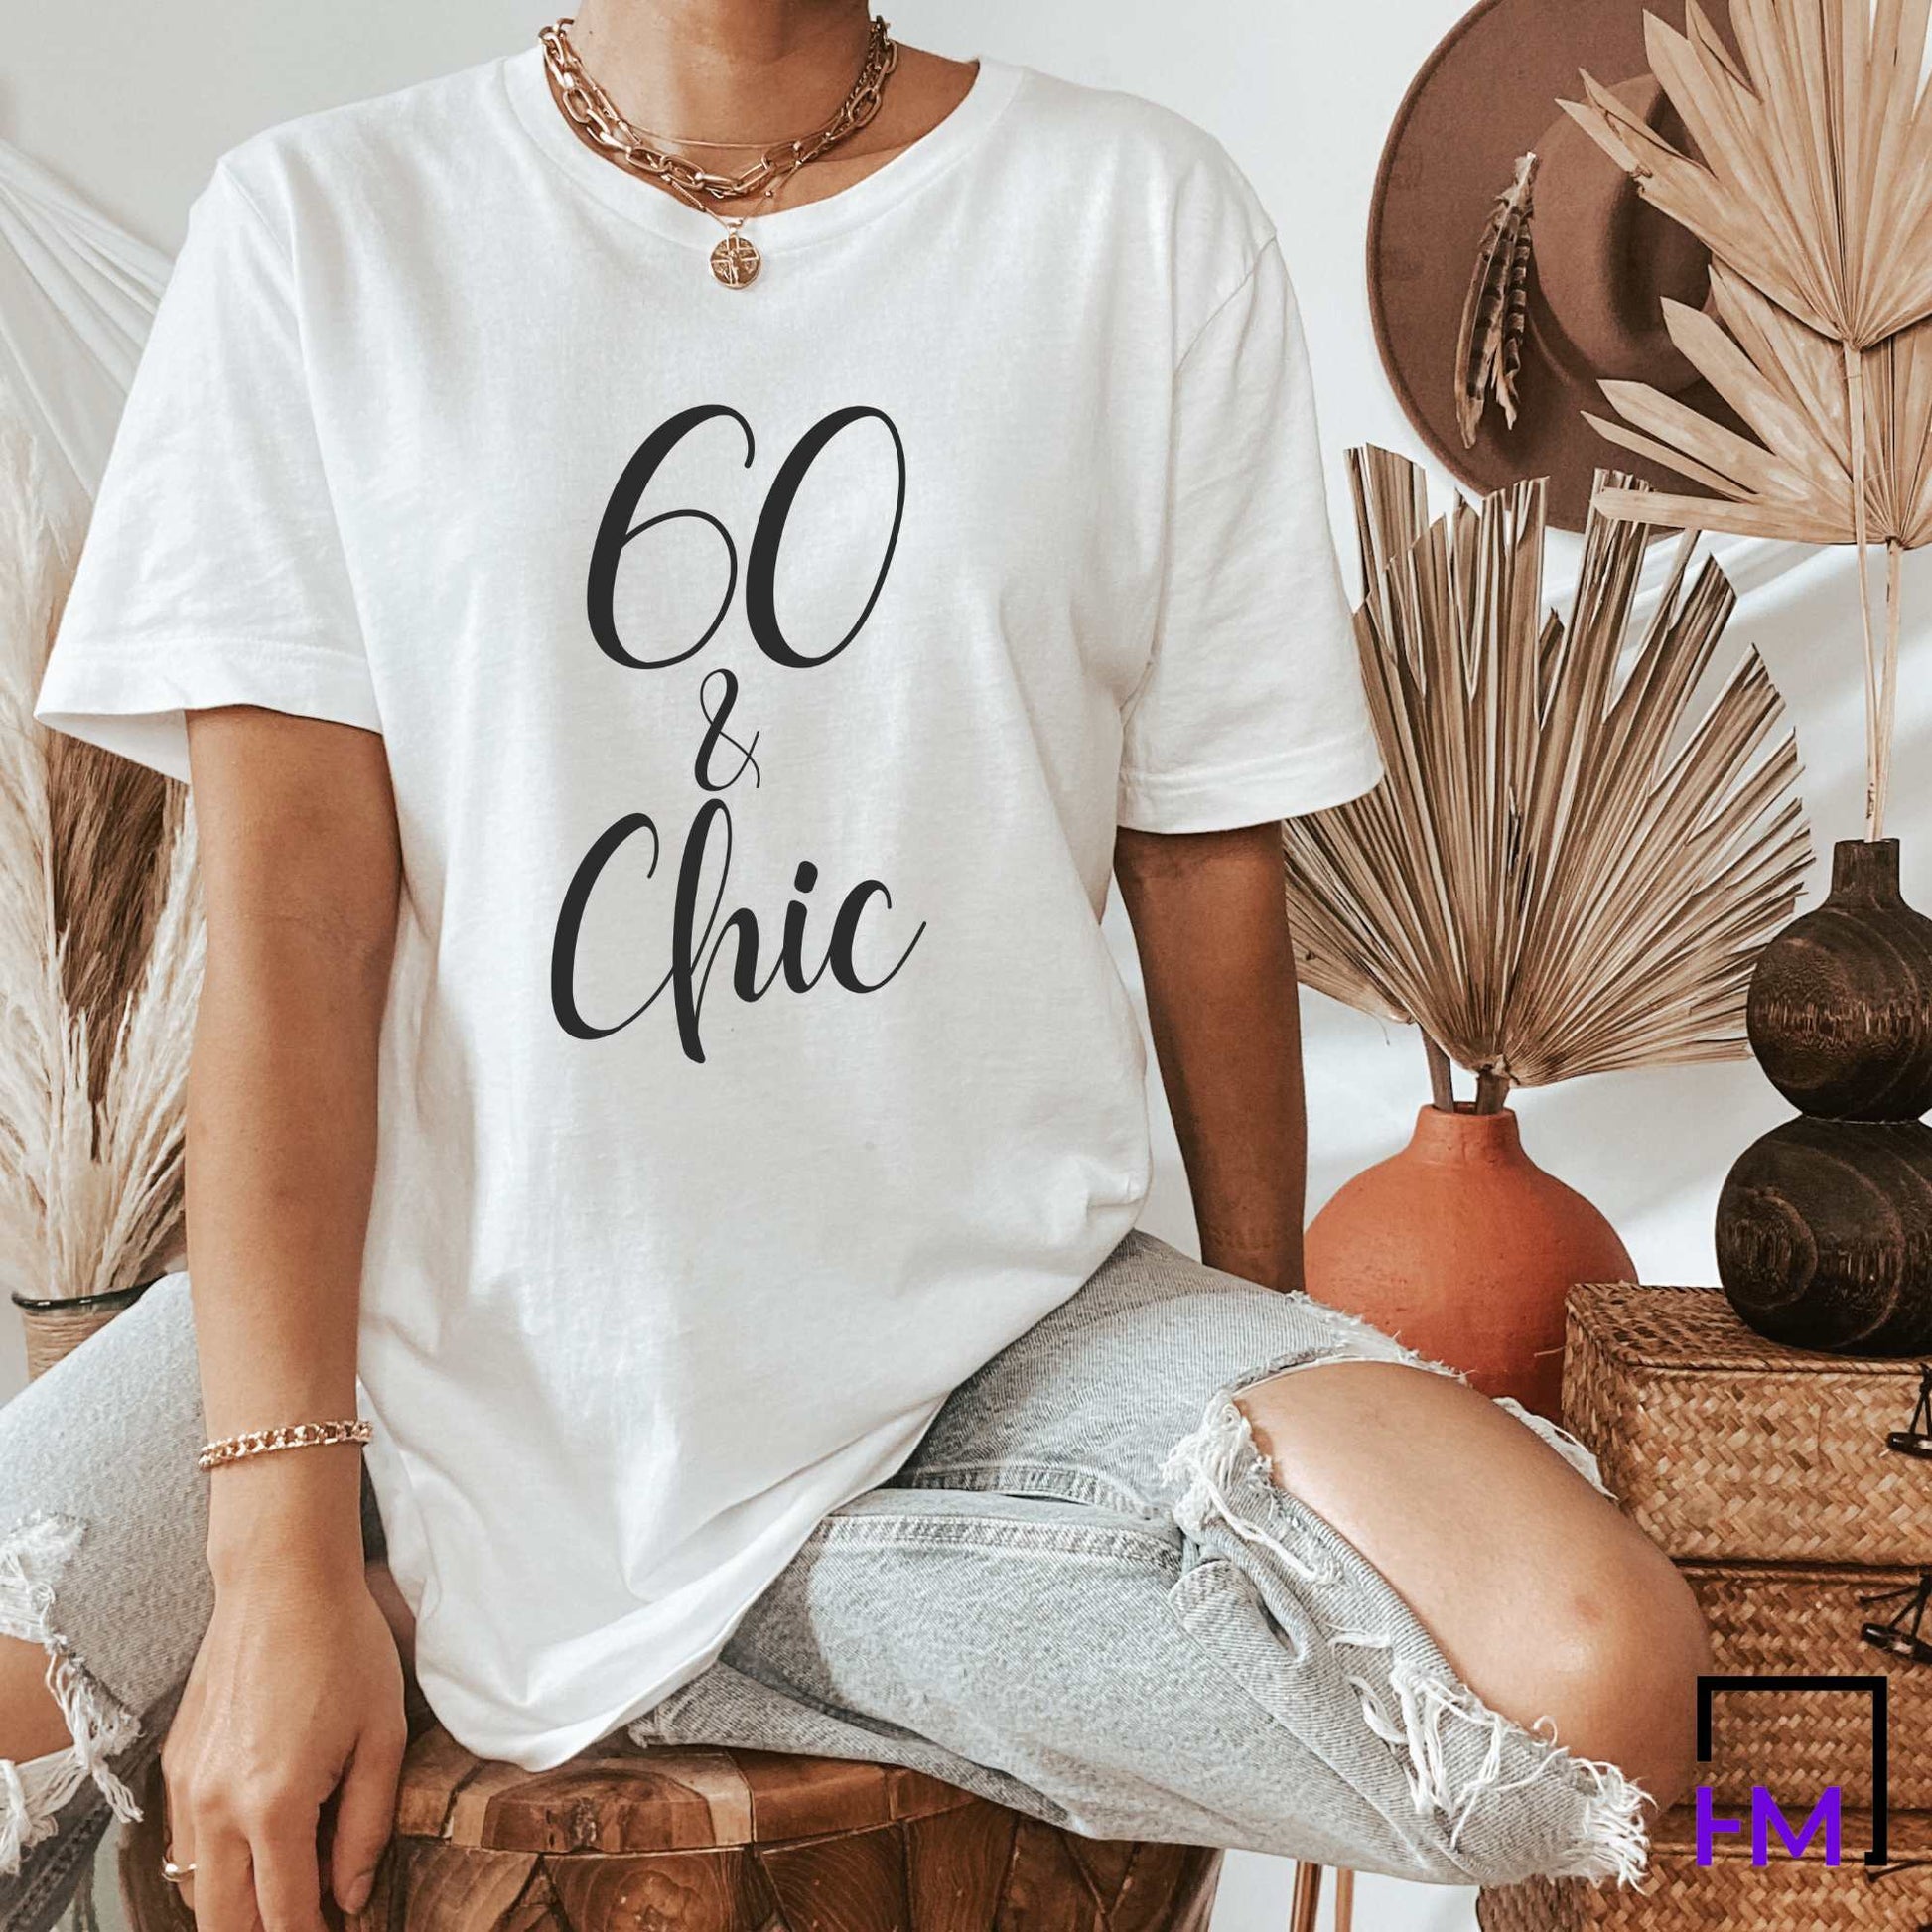 60 & Chic! 60 Birthday Shirt for Women, Gift for 60th Birthday Party